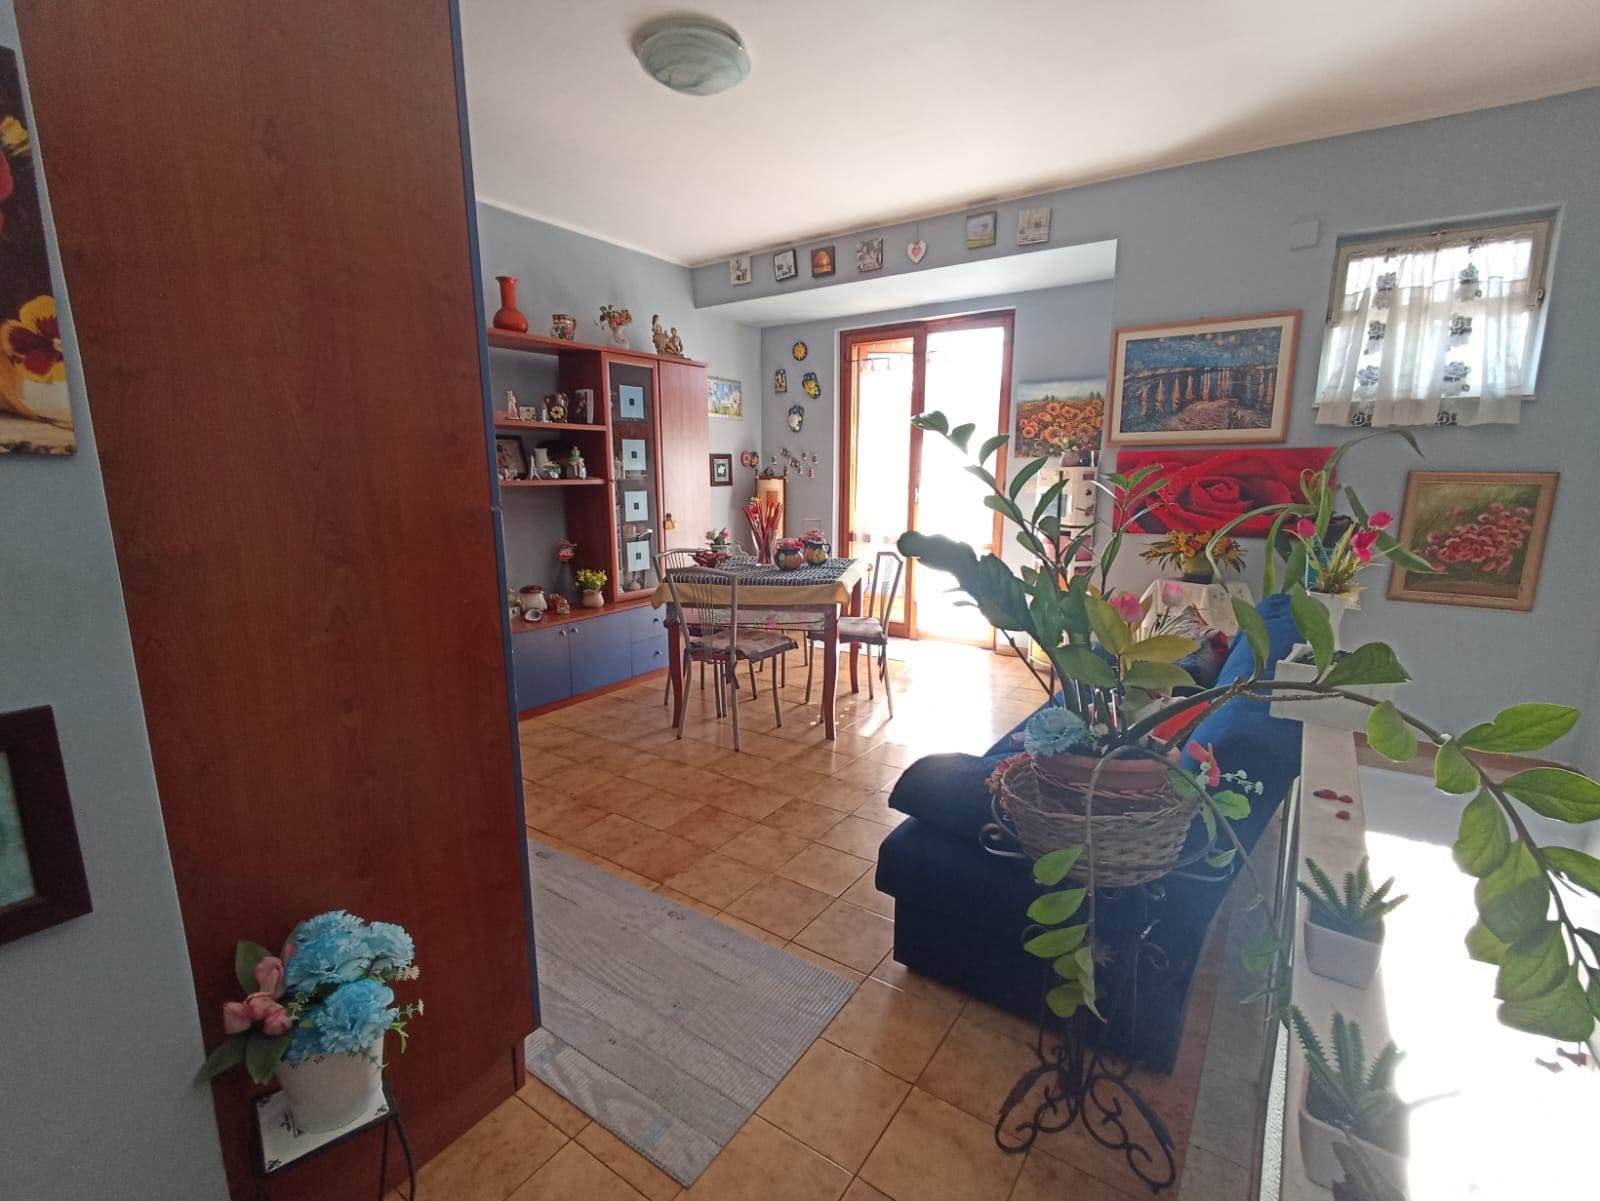 VAMPOLIERI, ACI CASTELLO, Apartment for sale of 96 Sq. mt., Good condition, Heating Non-existent, Energetic class: F, placed at Ground, composed by: 